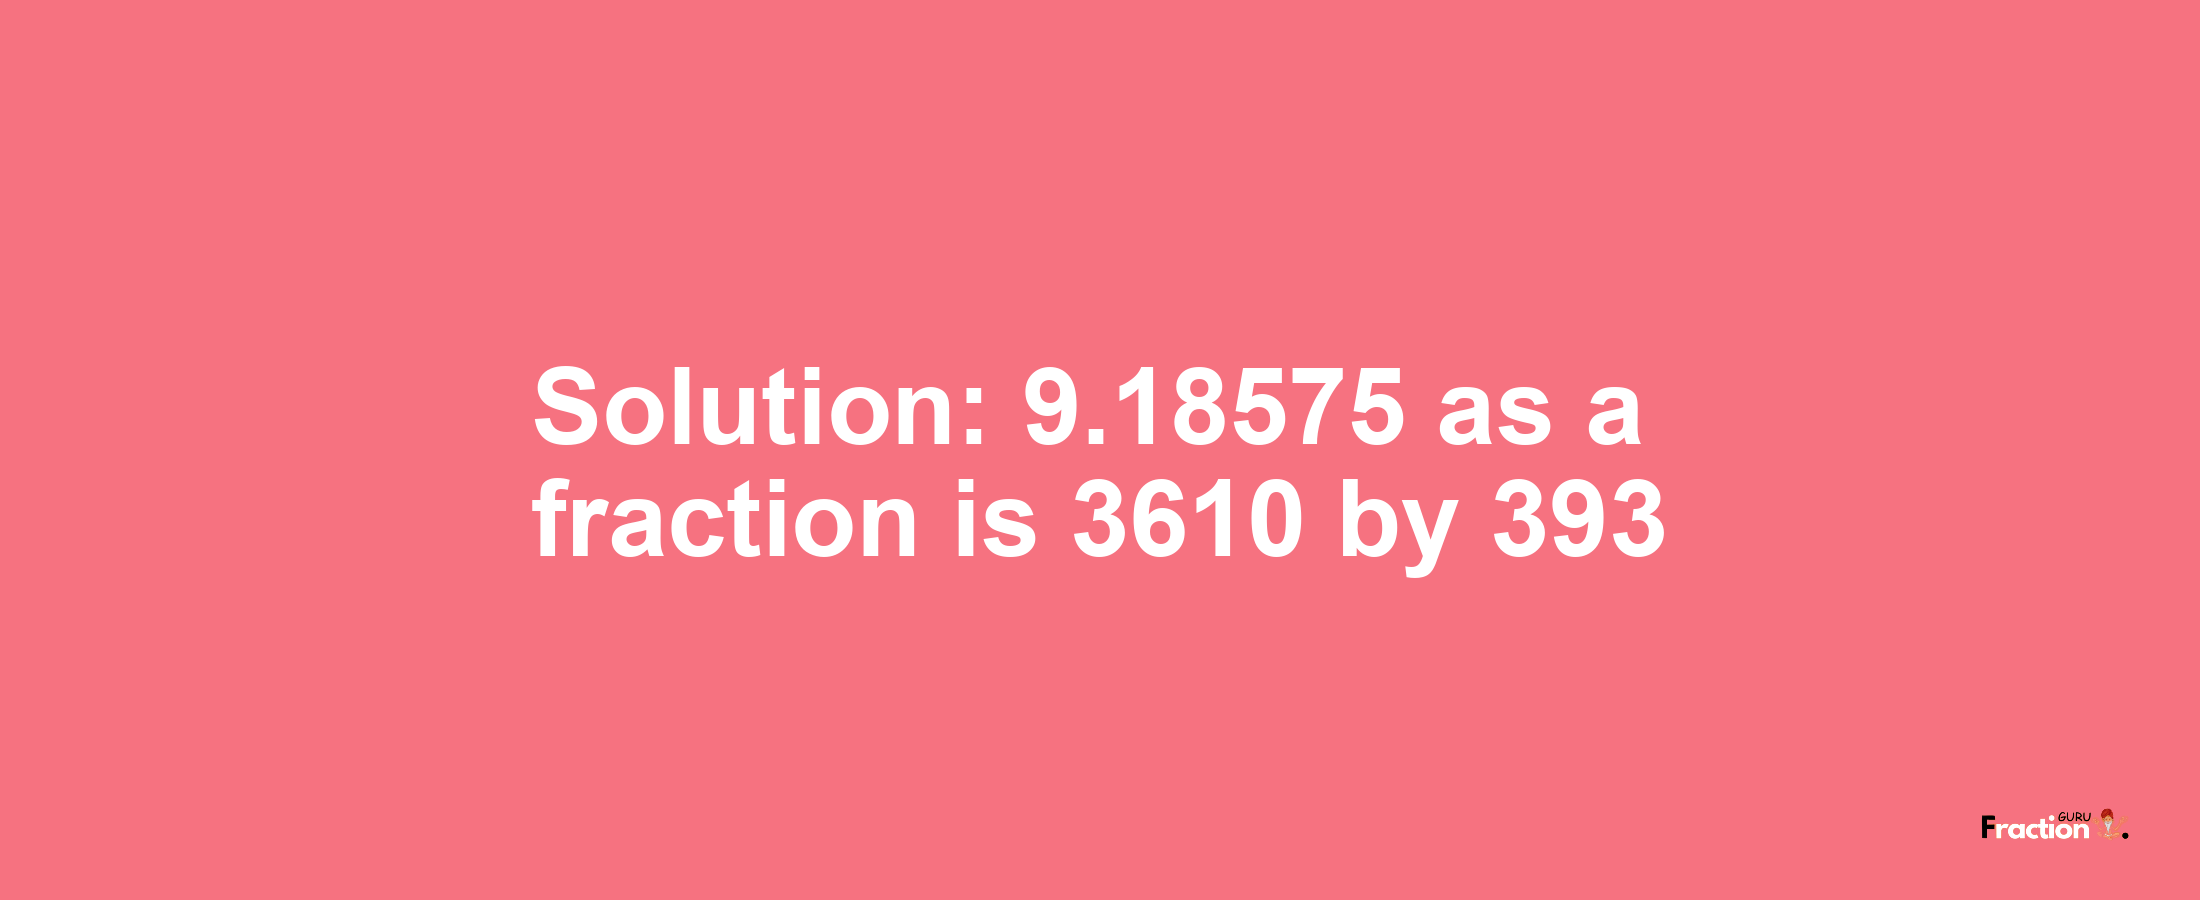 Solution:9.18575 as a fraction is 3610/393